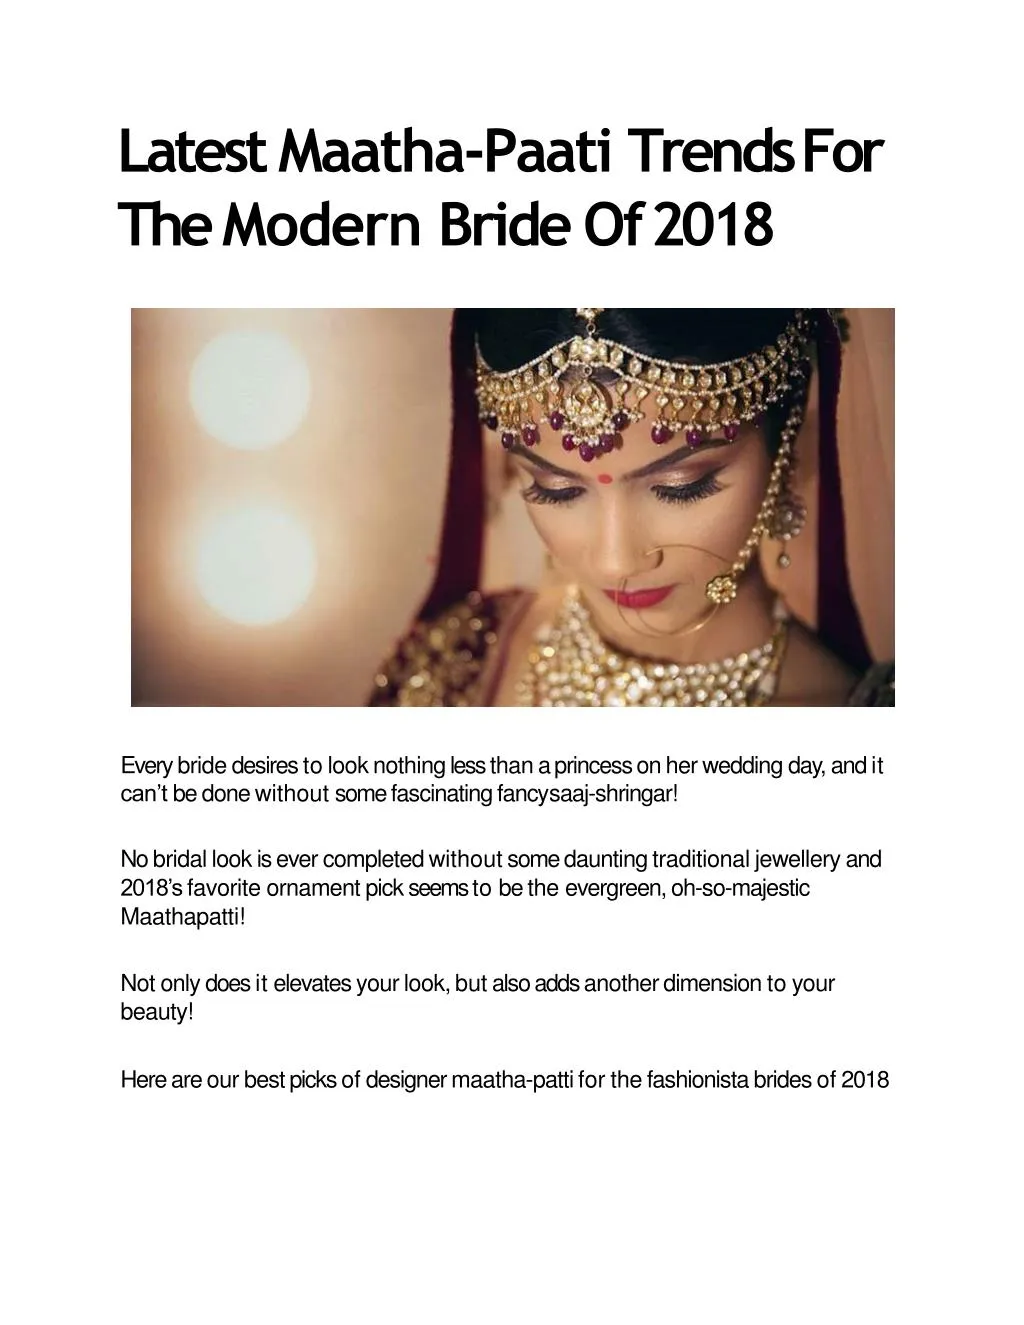 latest maatha paati trends for the modern bride of 2018